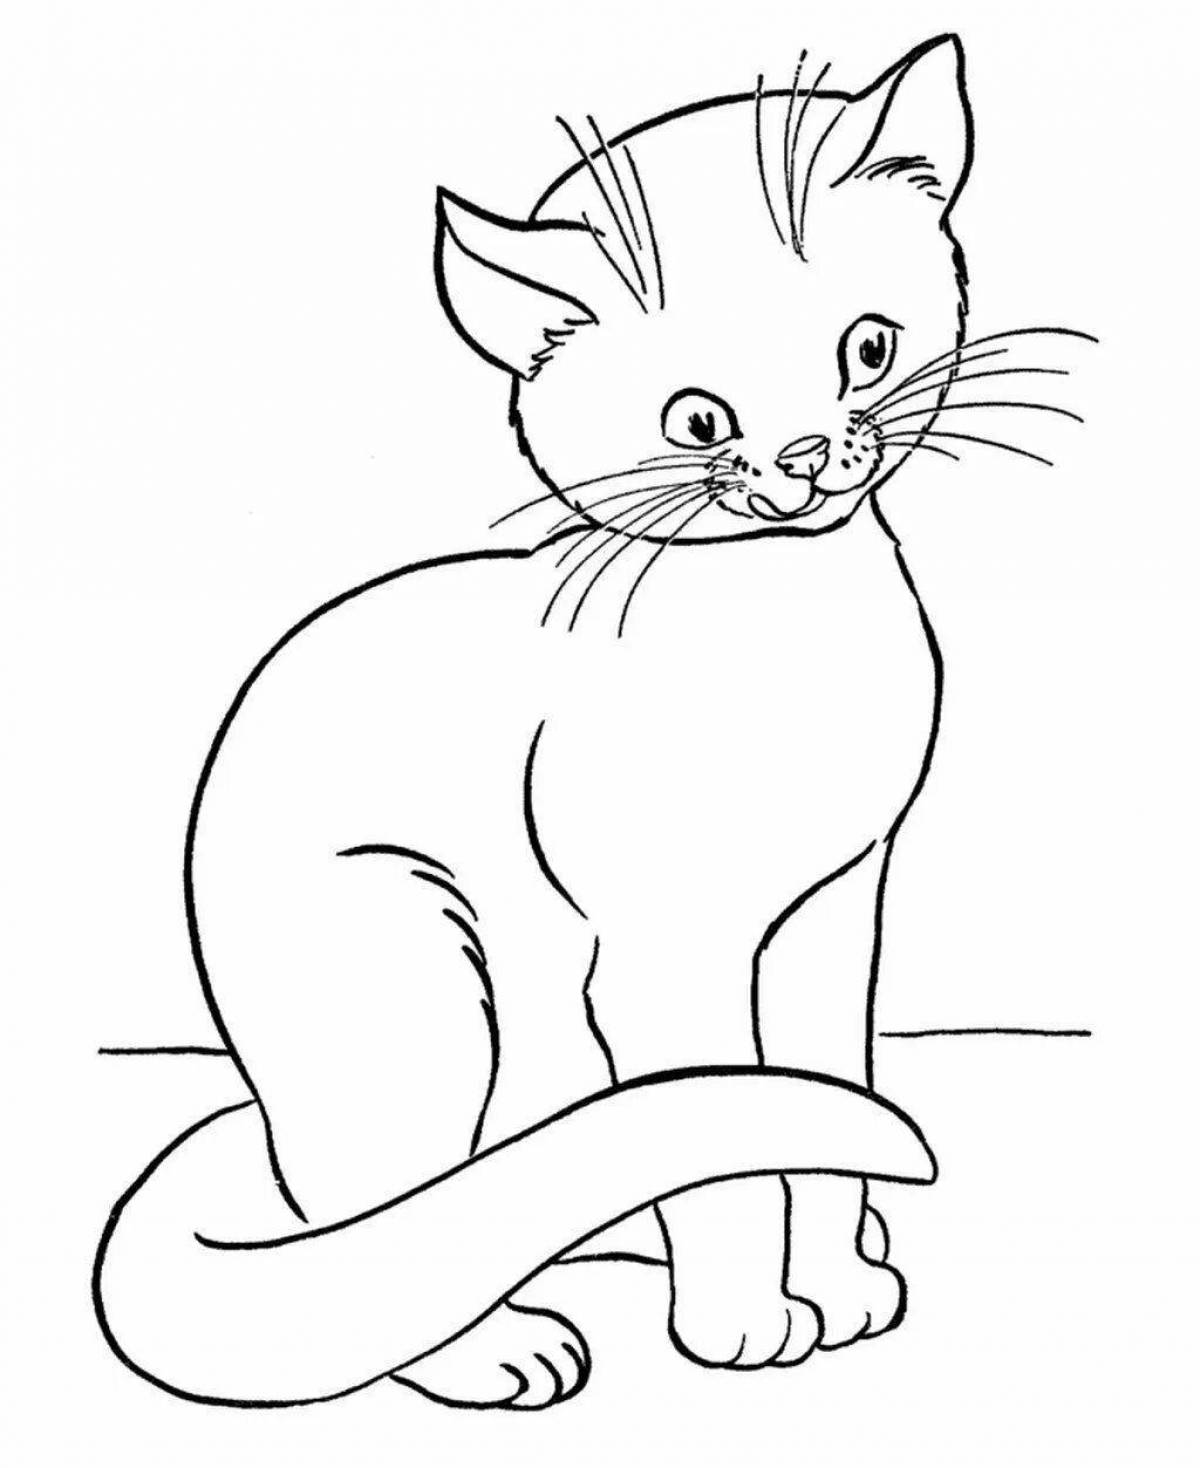 Coloring page graceful black and white cat